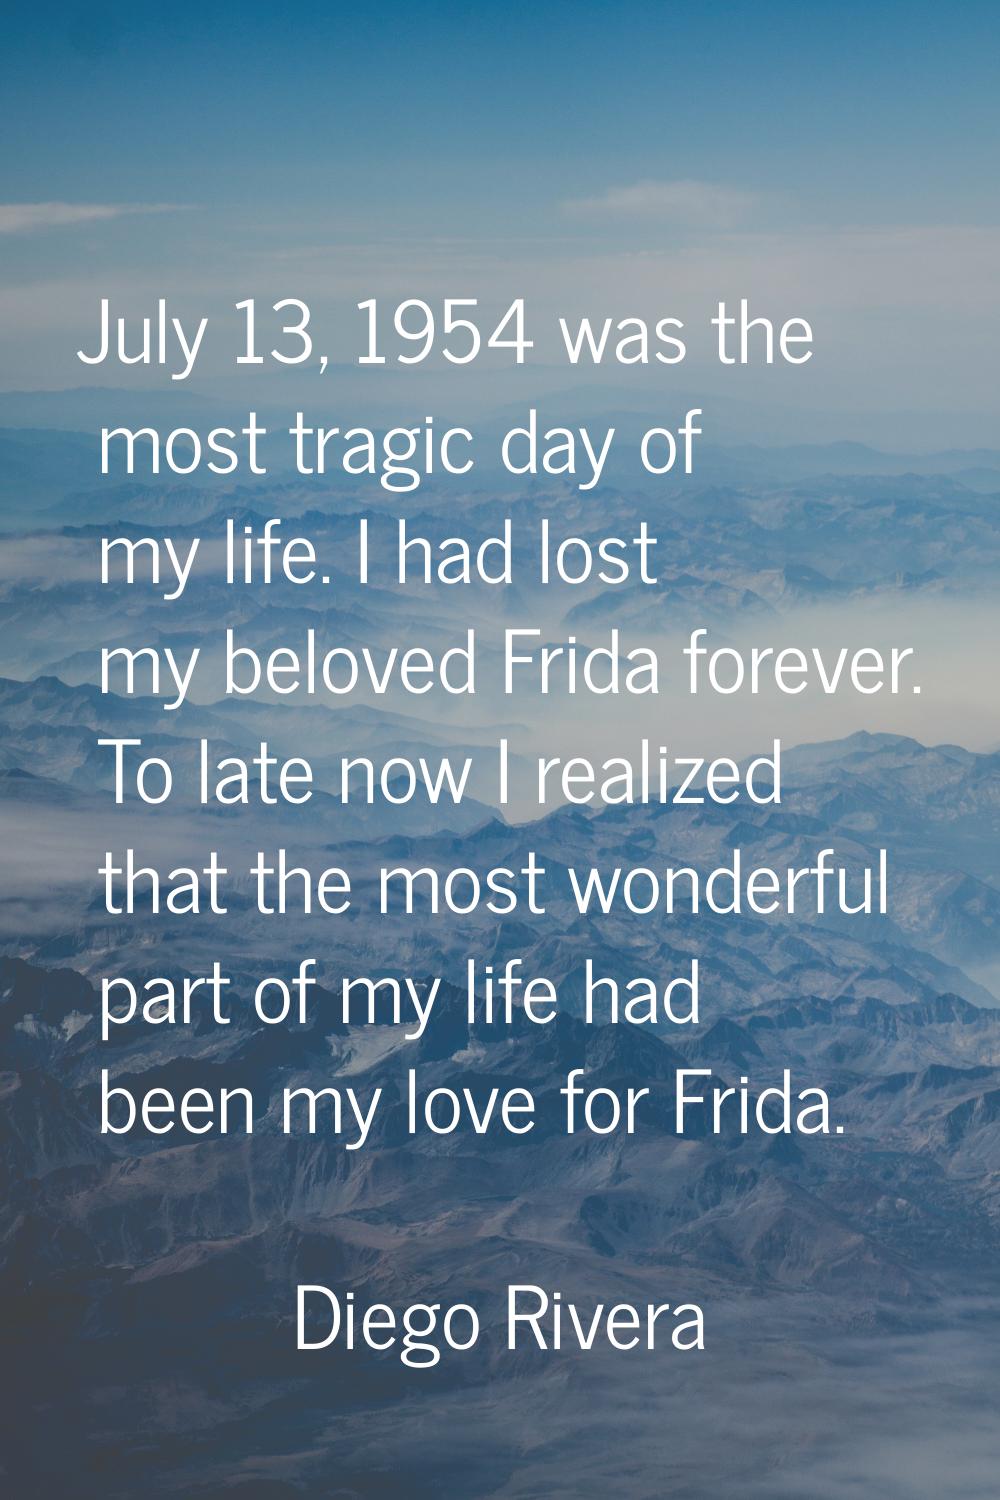 July 13, 1954 was the most tragic day of my life. I had lost my beloved Frida forever. To late now 